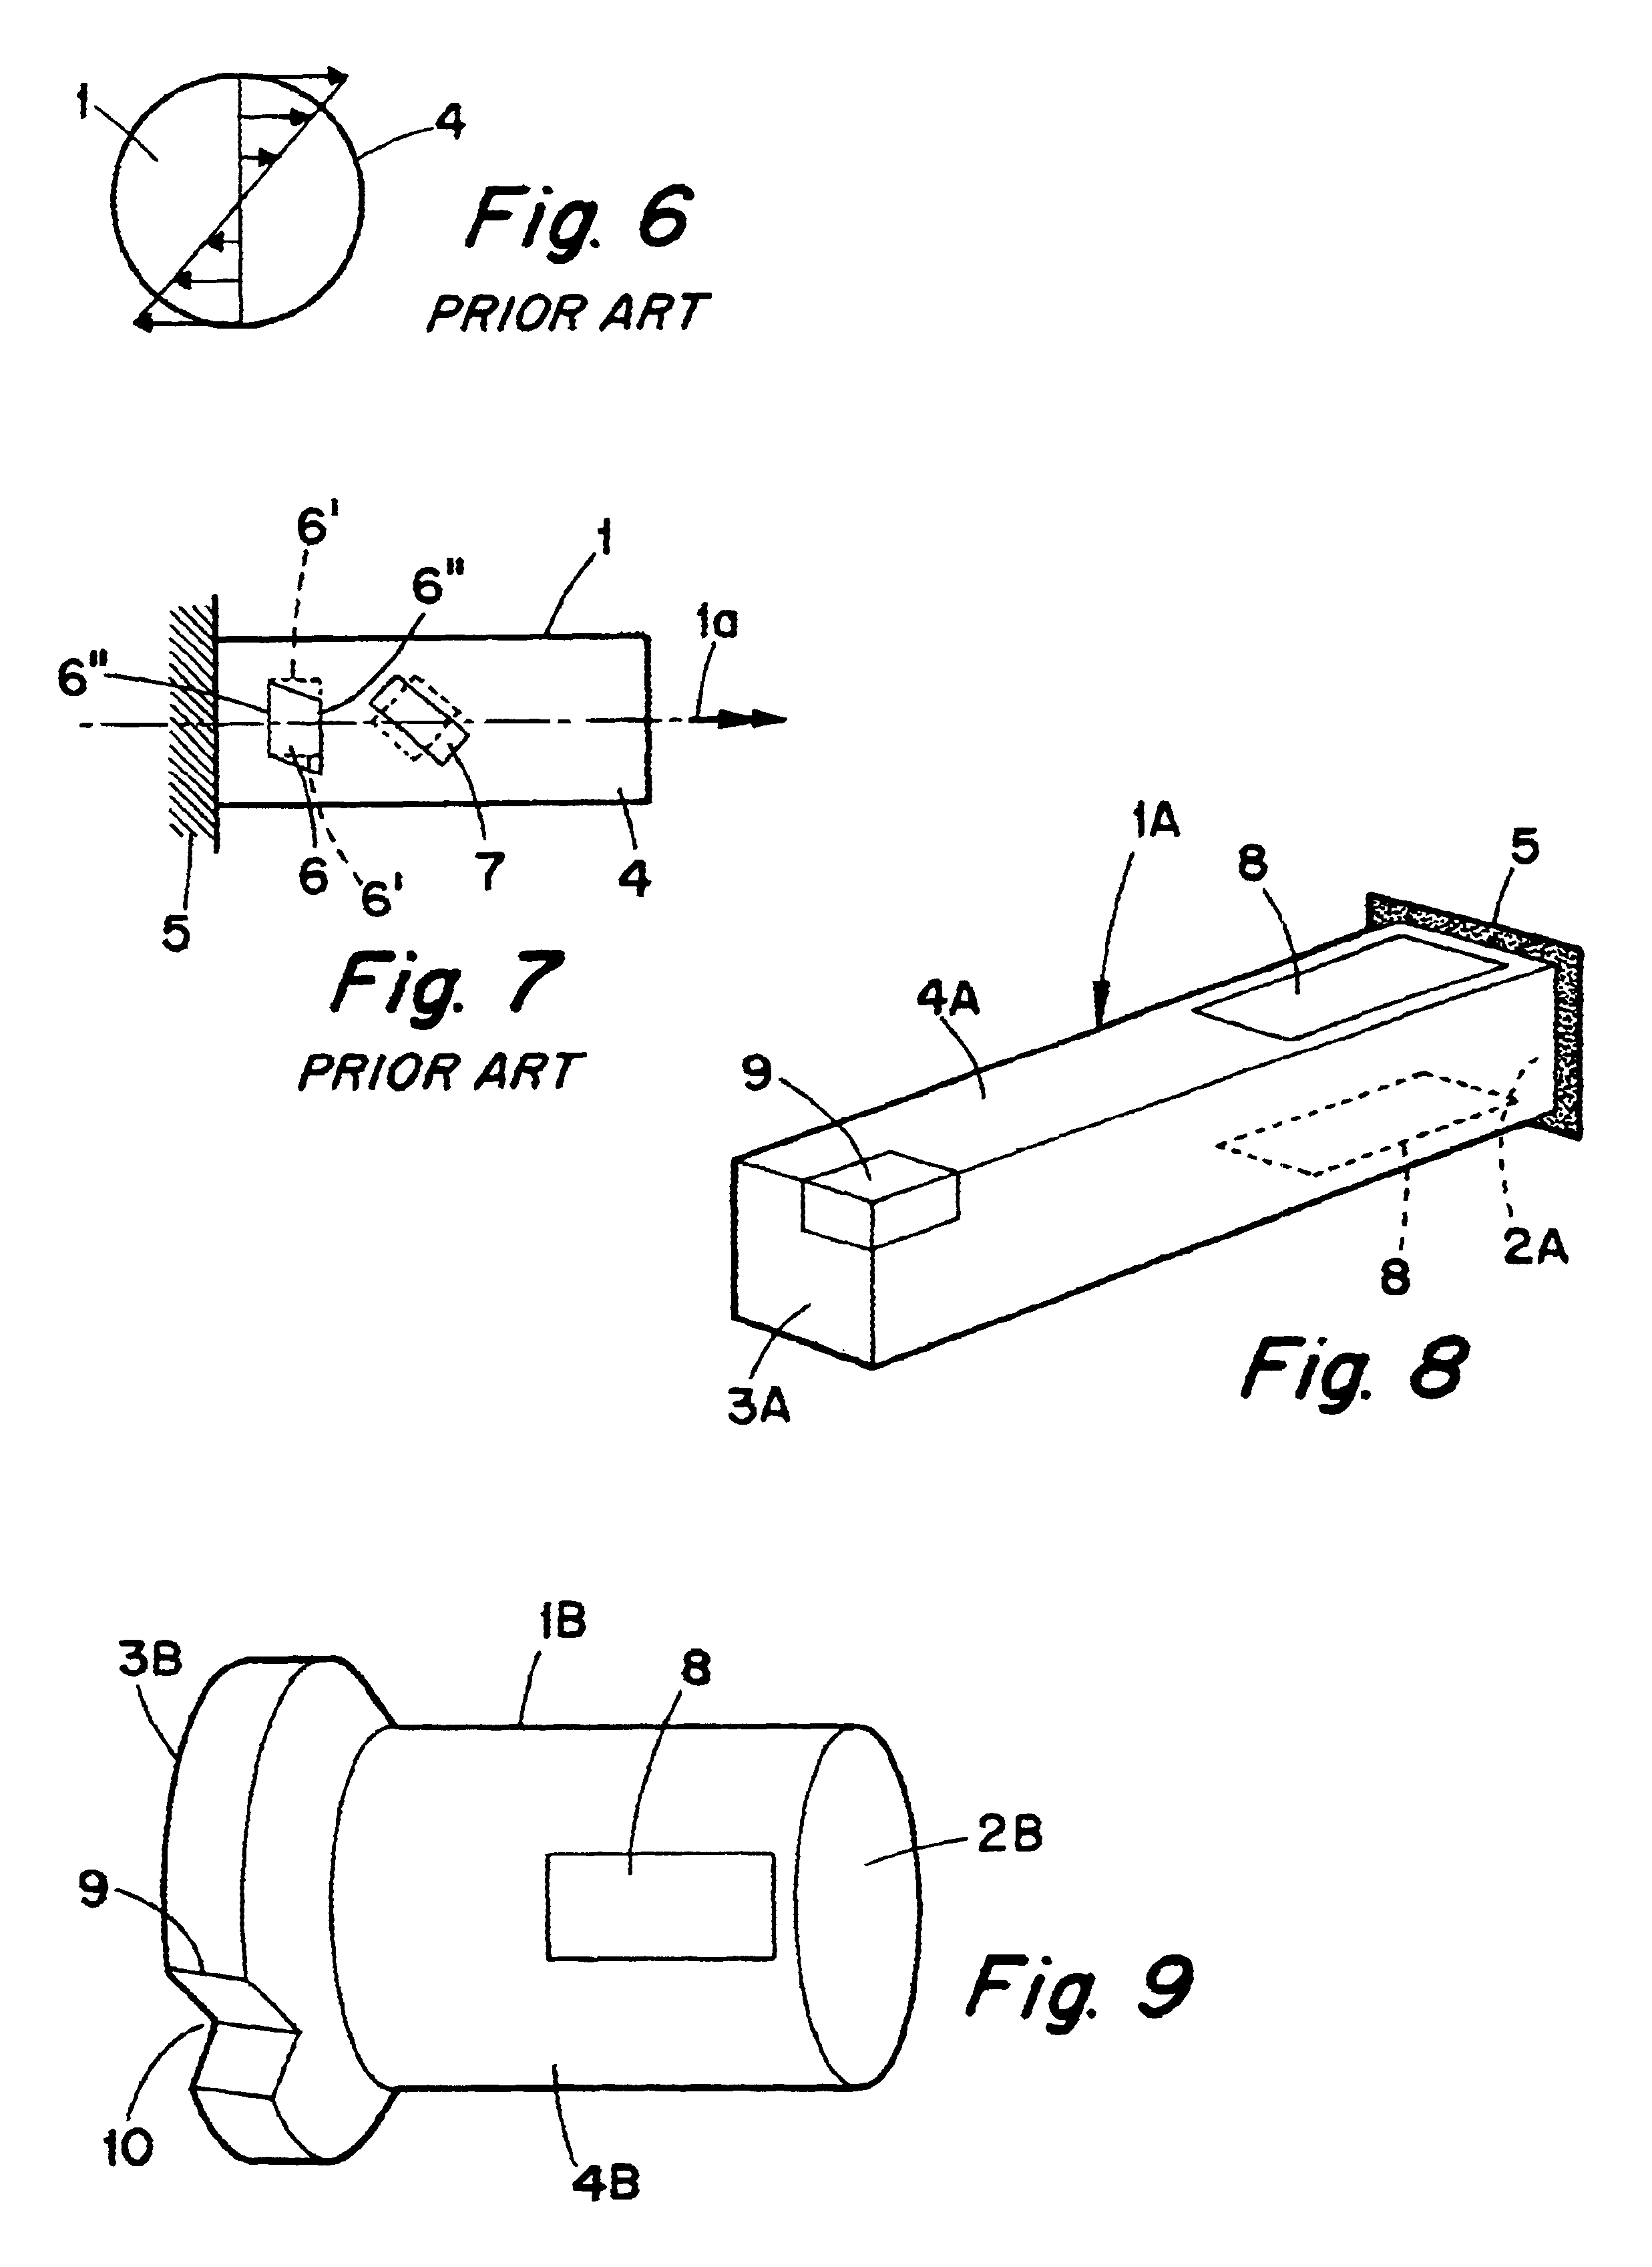 Active anti-vibration system for cutting tools utilizing piezo-electric elements